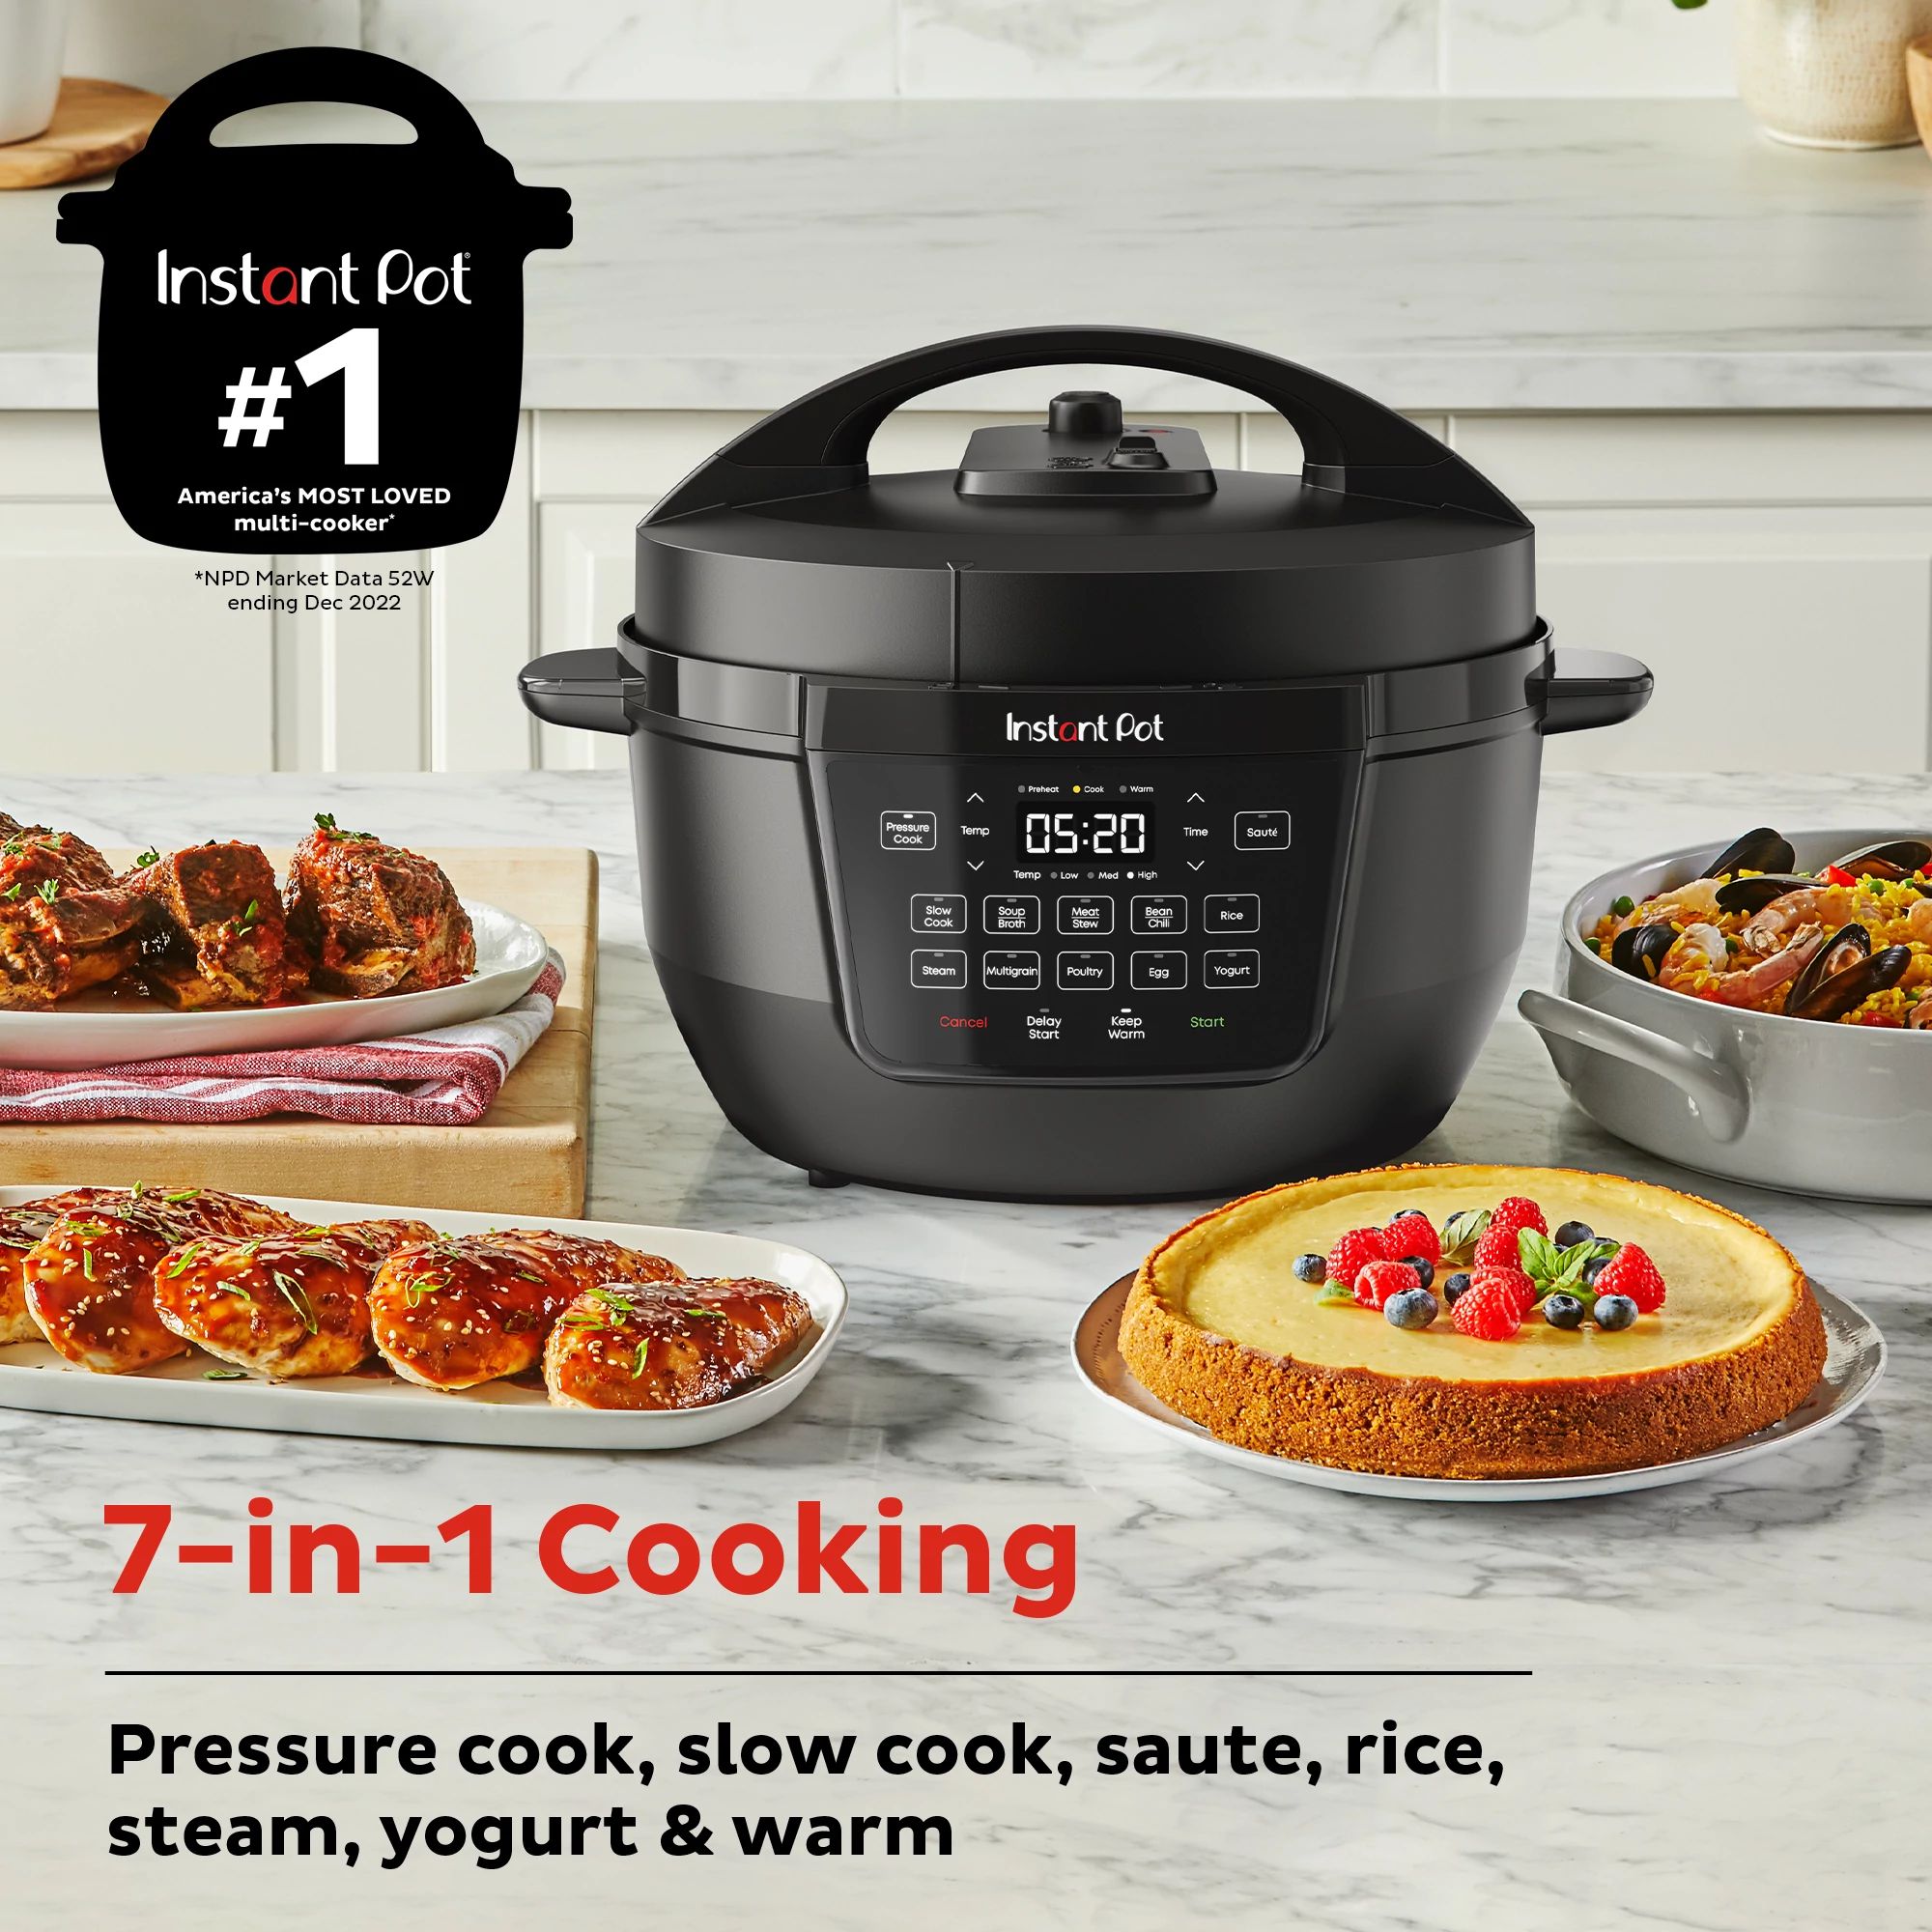 Buy Instant Pot Duo 5.35 Litre Electric Pressure Cooker with Keep